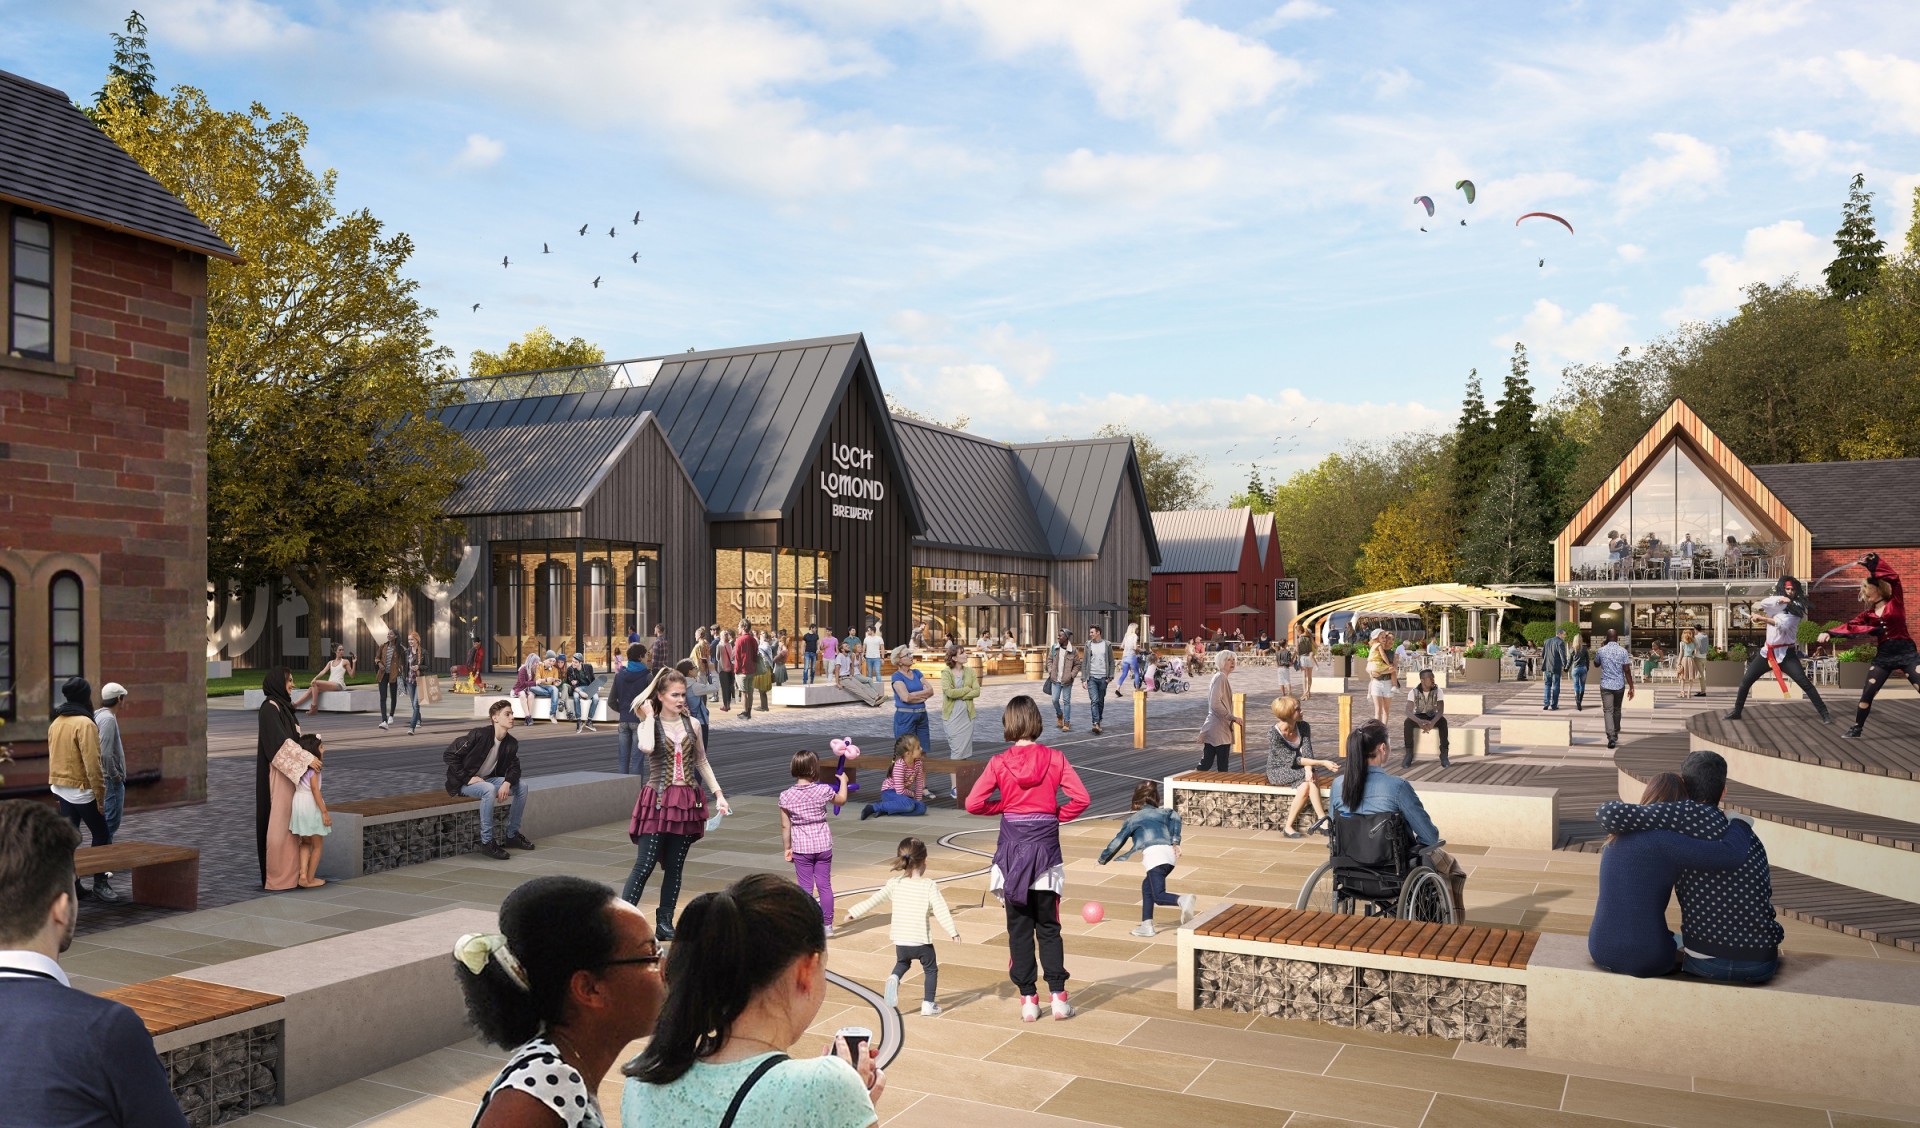 Revised plans submitted for £40m Loch Lomond leisure development